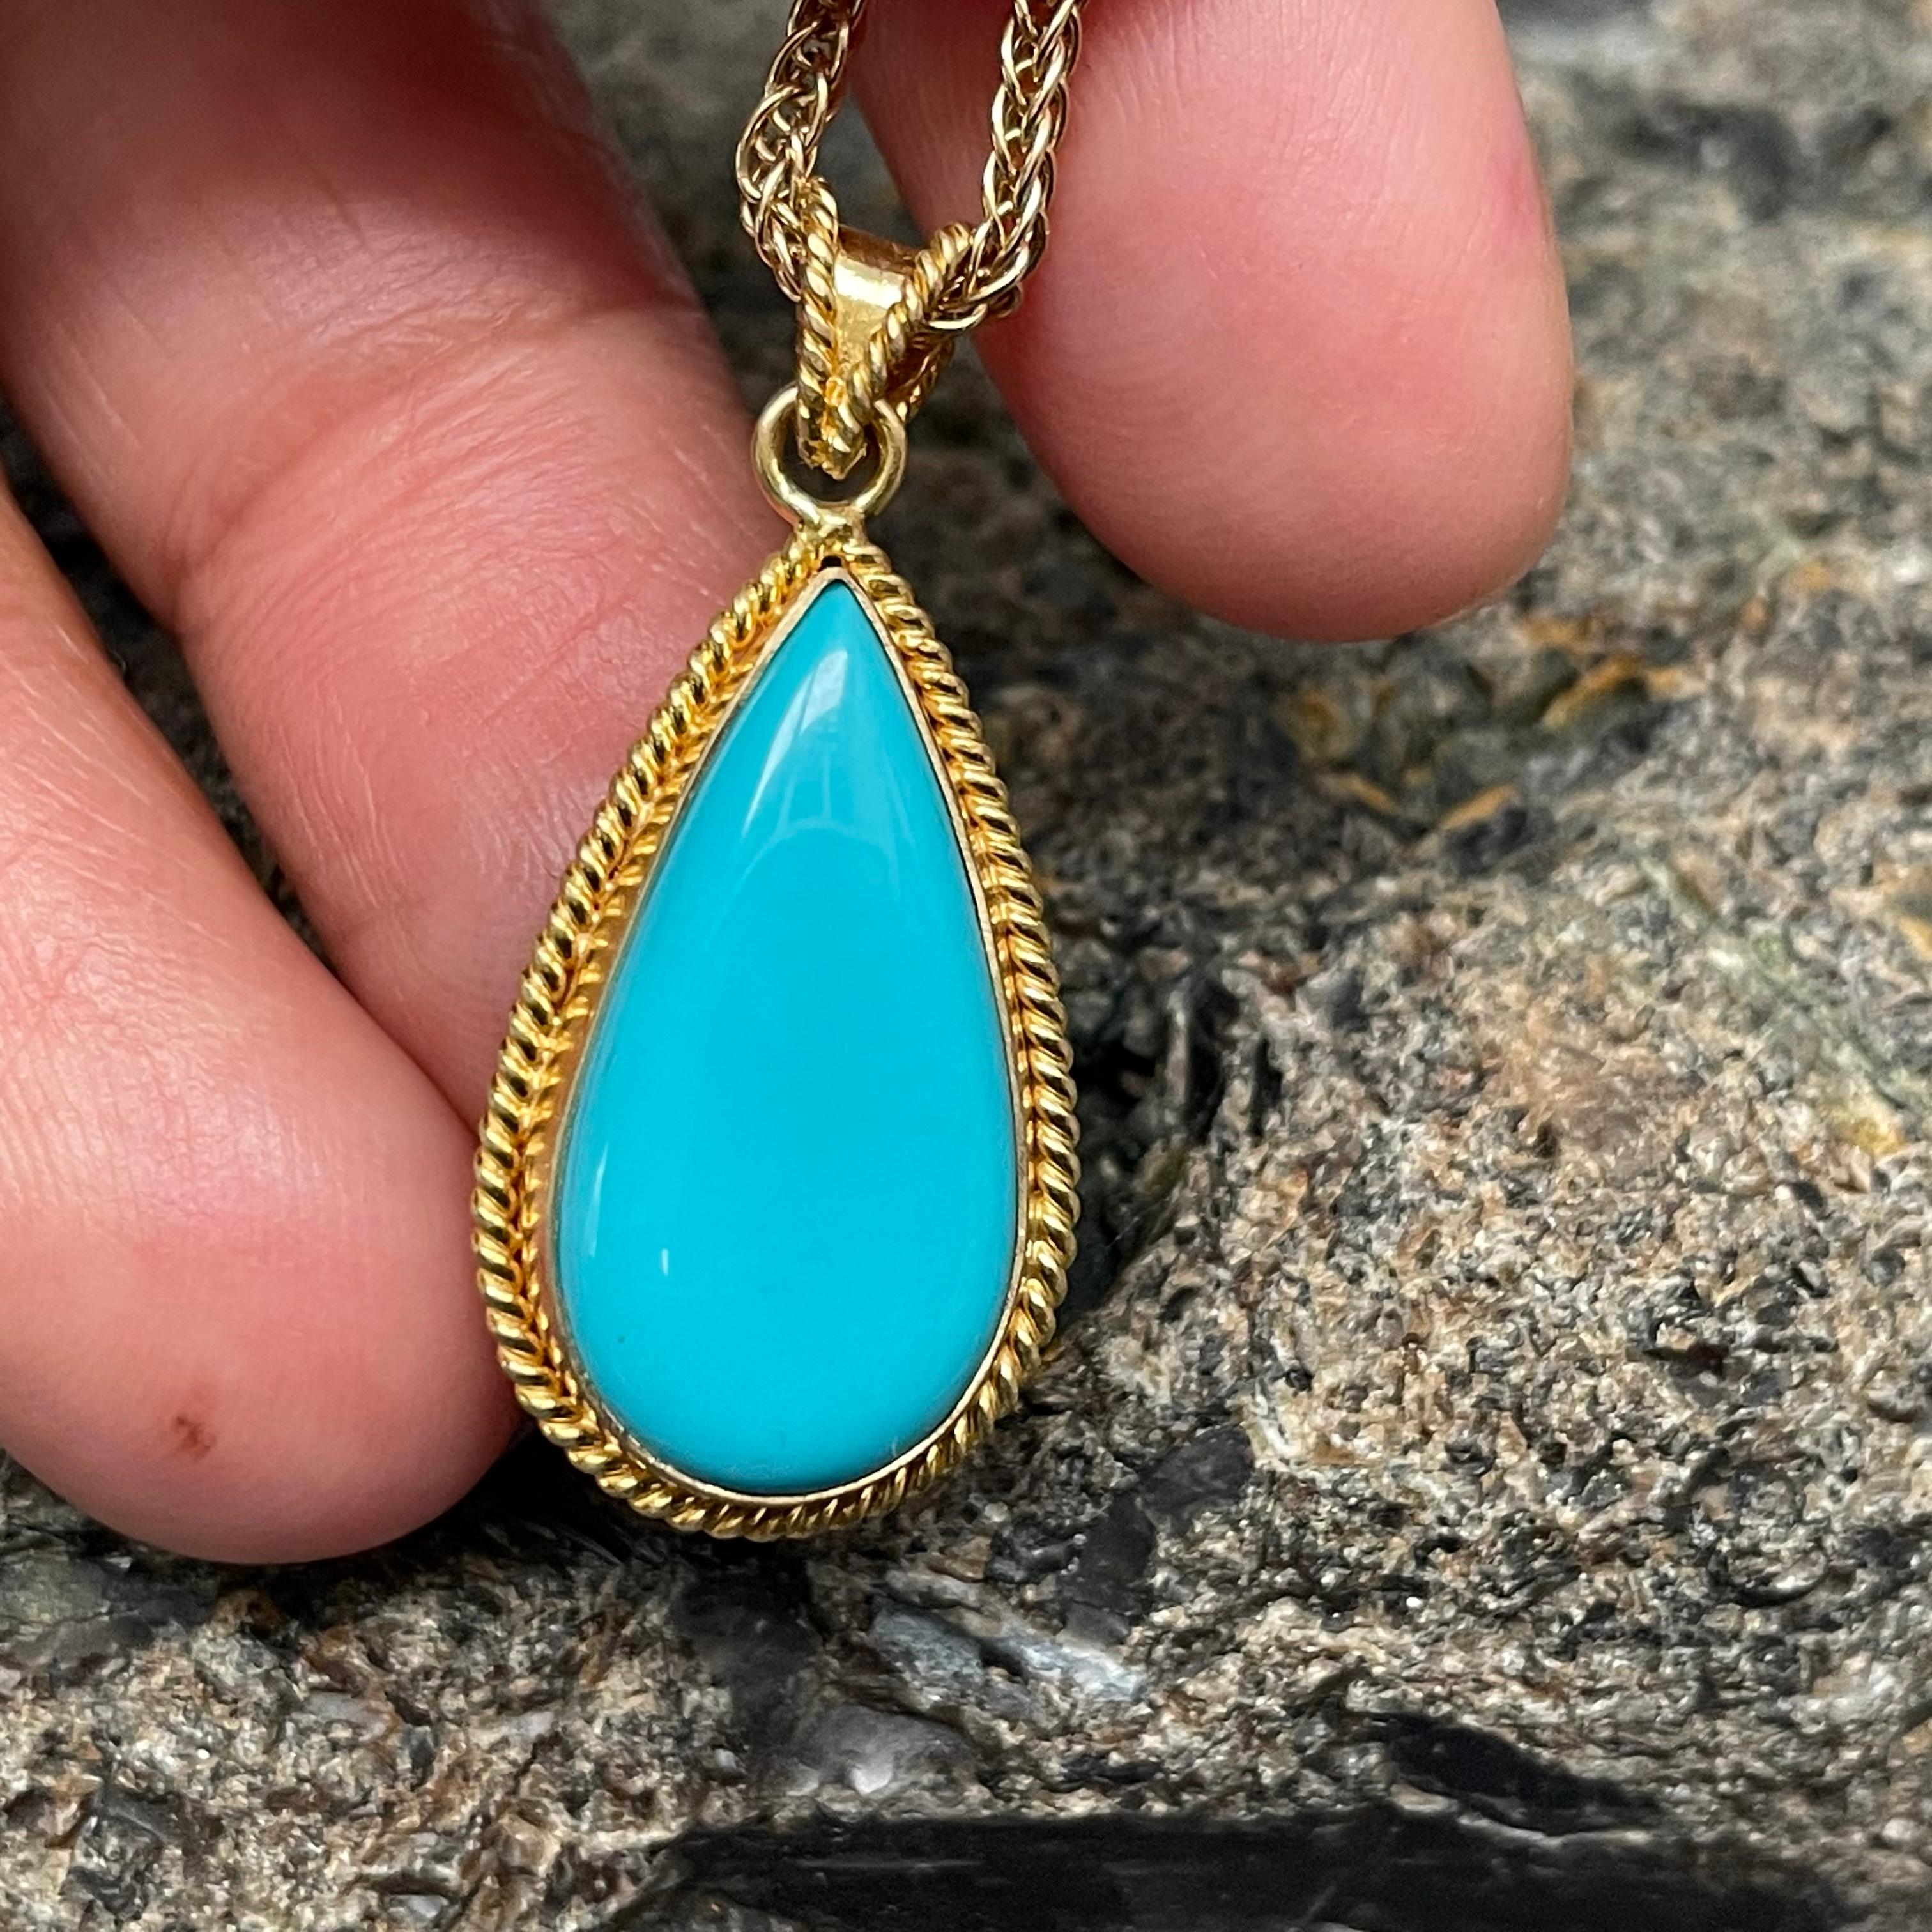 A perfect 11 x 21 mm pear shaped Arizona Sleeping Beauty mine turquoise cabochon is held in a classic handmade 18K gold twist wire bezel in this elegant design. The 18K woven triple spiga chain shown is included, in a 20